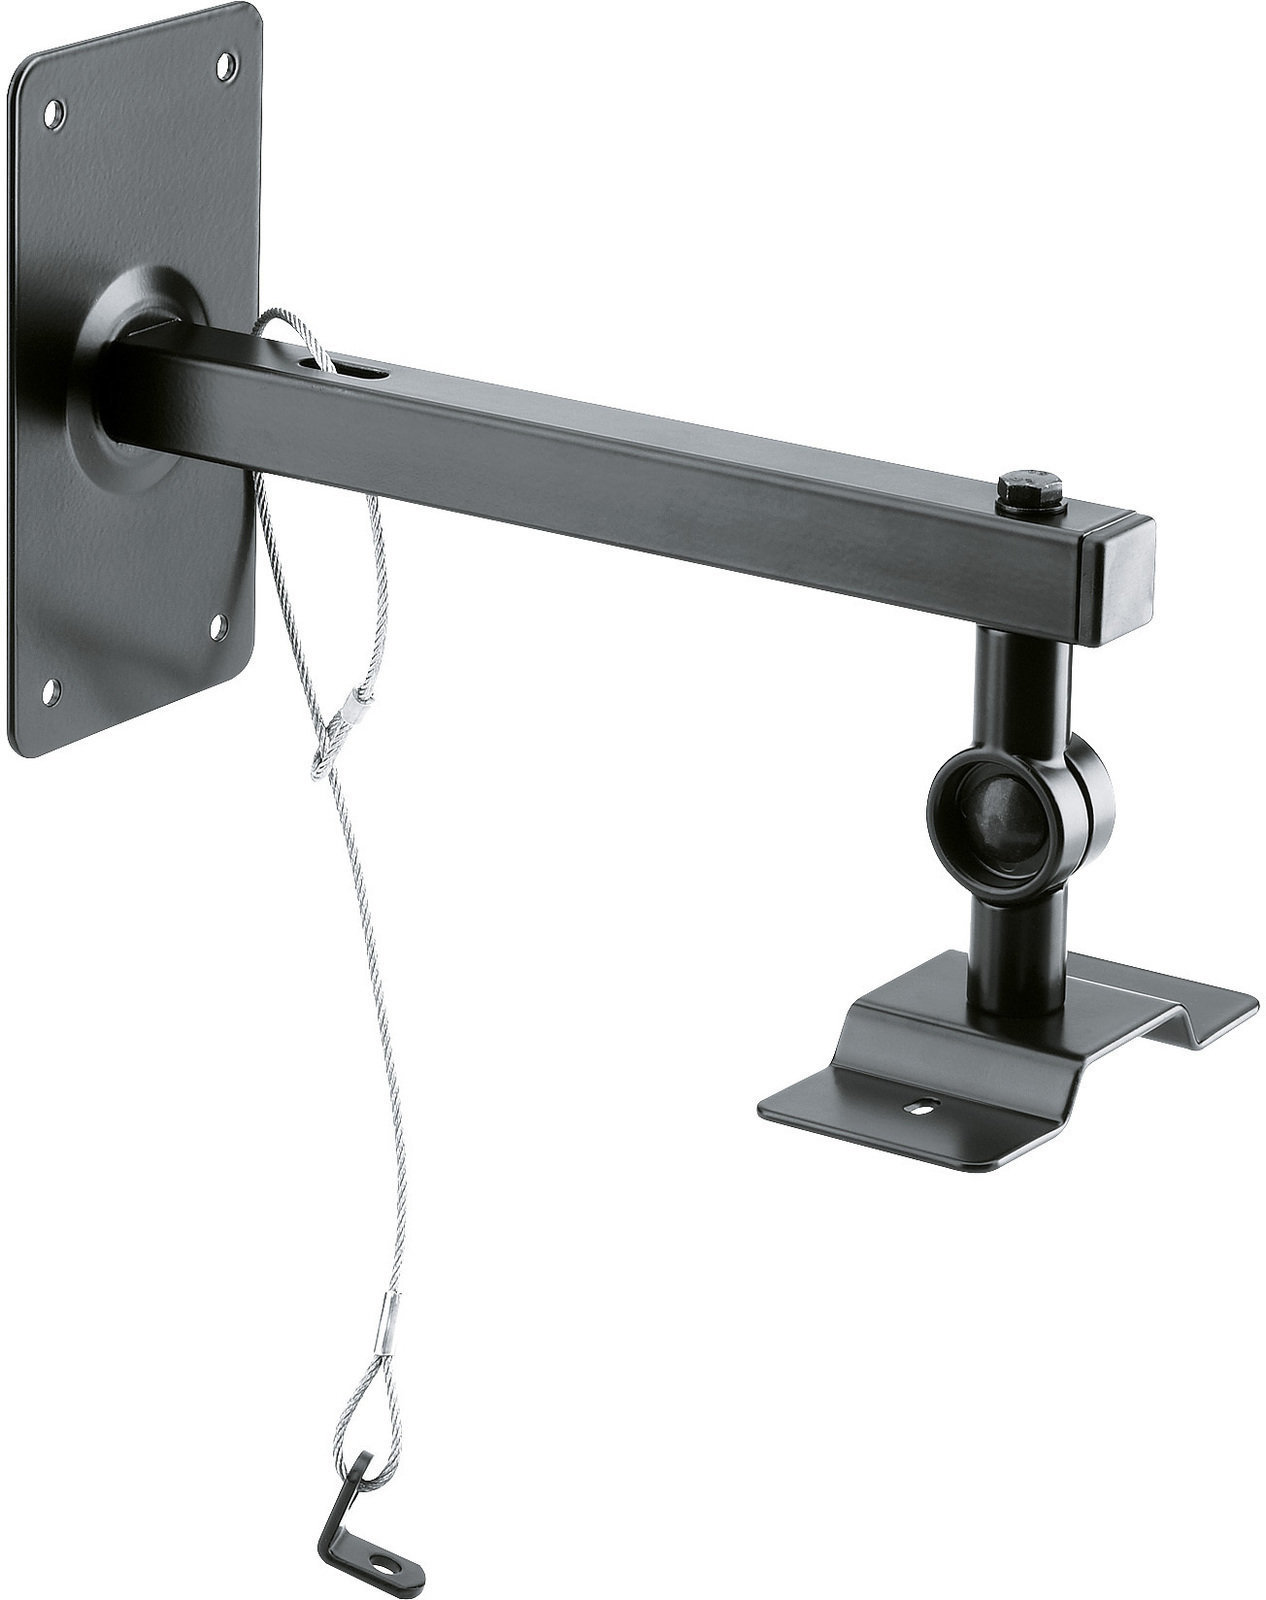 Wall mount for speakerboxes Konig & Meyer 24195 Wall mount for speakerboxes